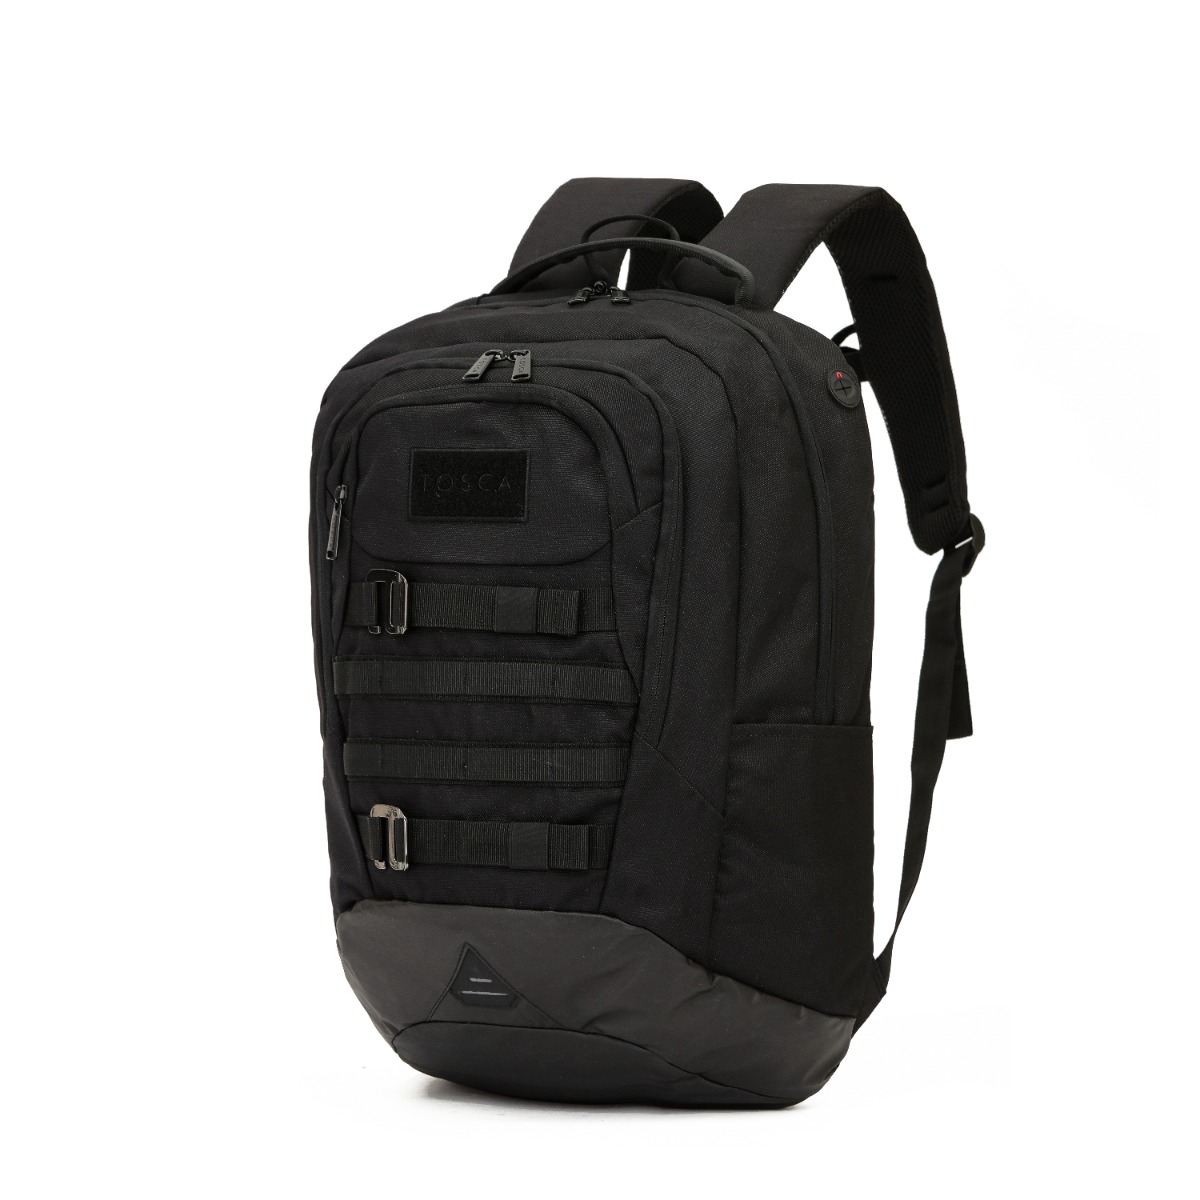 Tosca 35LT TUFF DAY PACK